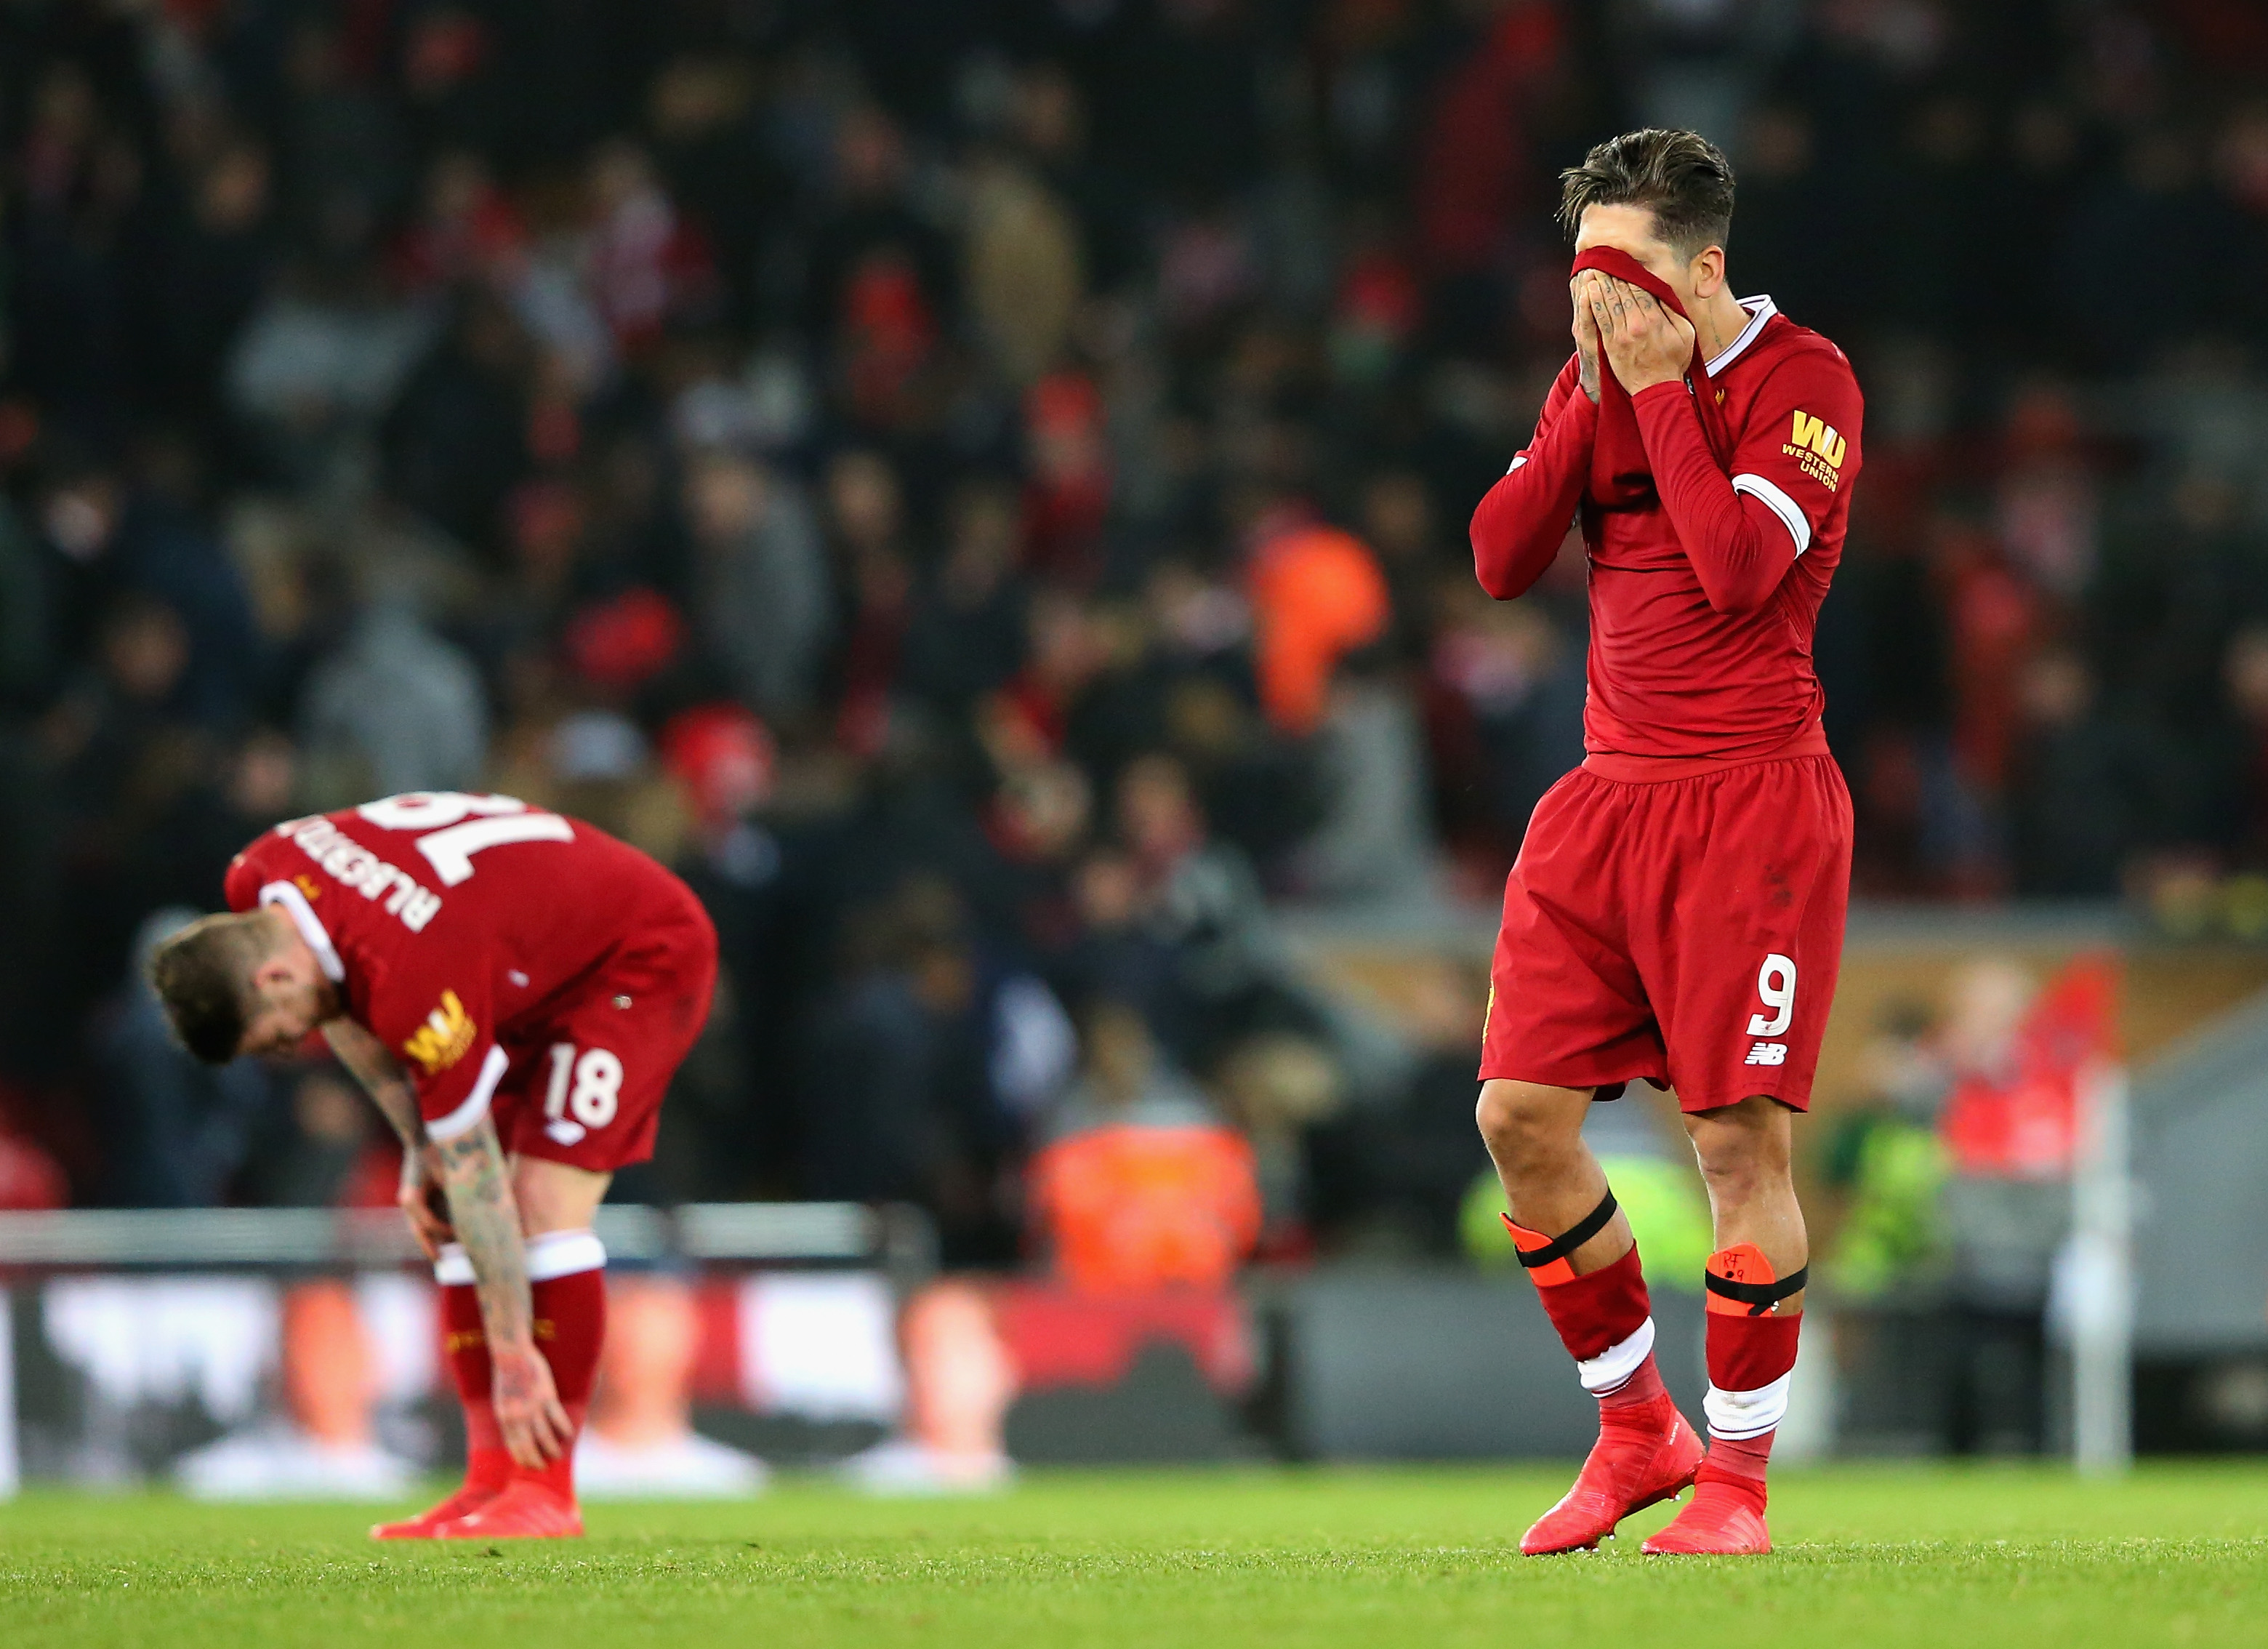 LIVERPOOL, ENGLAND - JANUARY 27:  Roberto Firmino of Liverpool looks dejected following defeat during The Emirates FA Cup Fourth Round match between Liverpool and West Bromwich Albion at Anfield on January 27, 2018 in Liverpool, England.  (Photo by Alex Livesey/Getty Images)